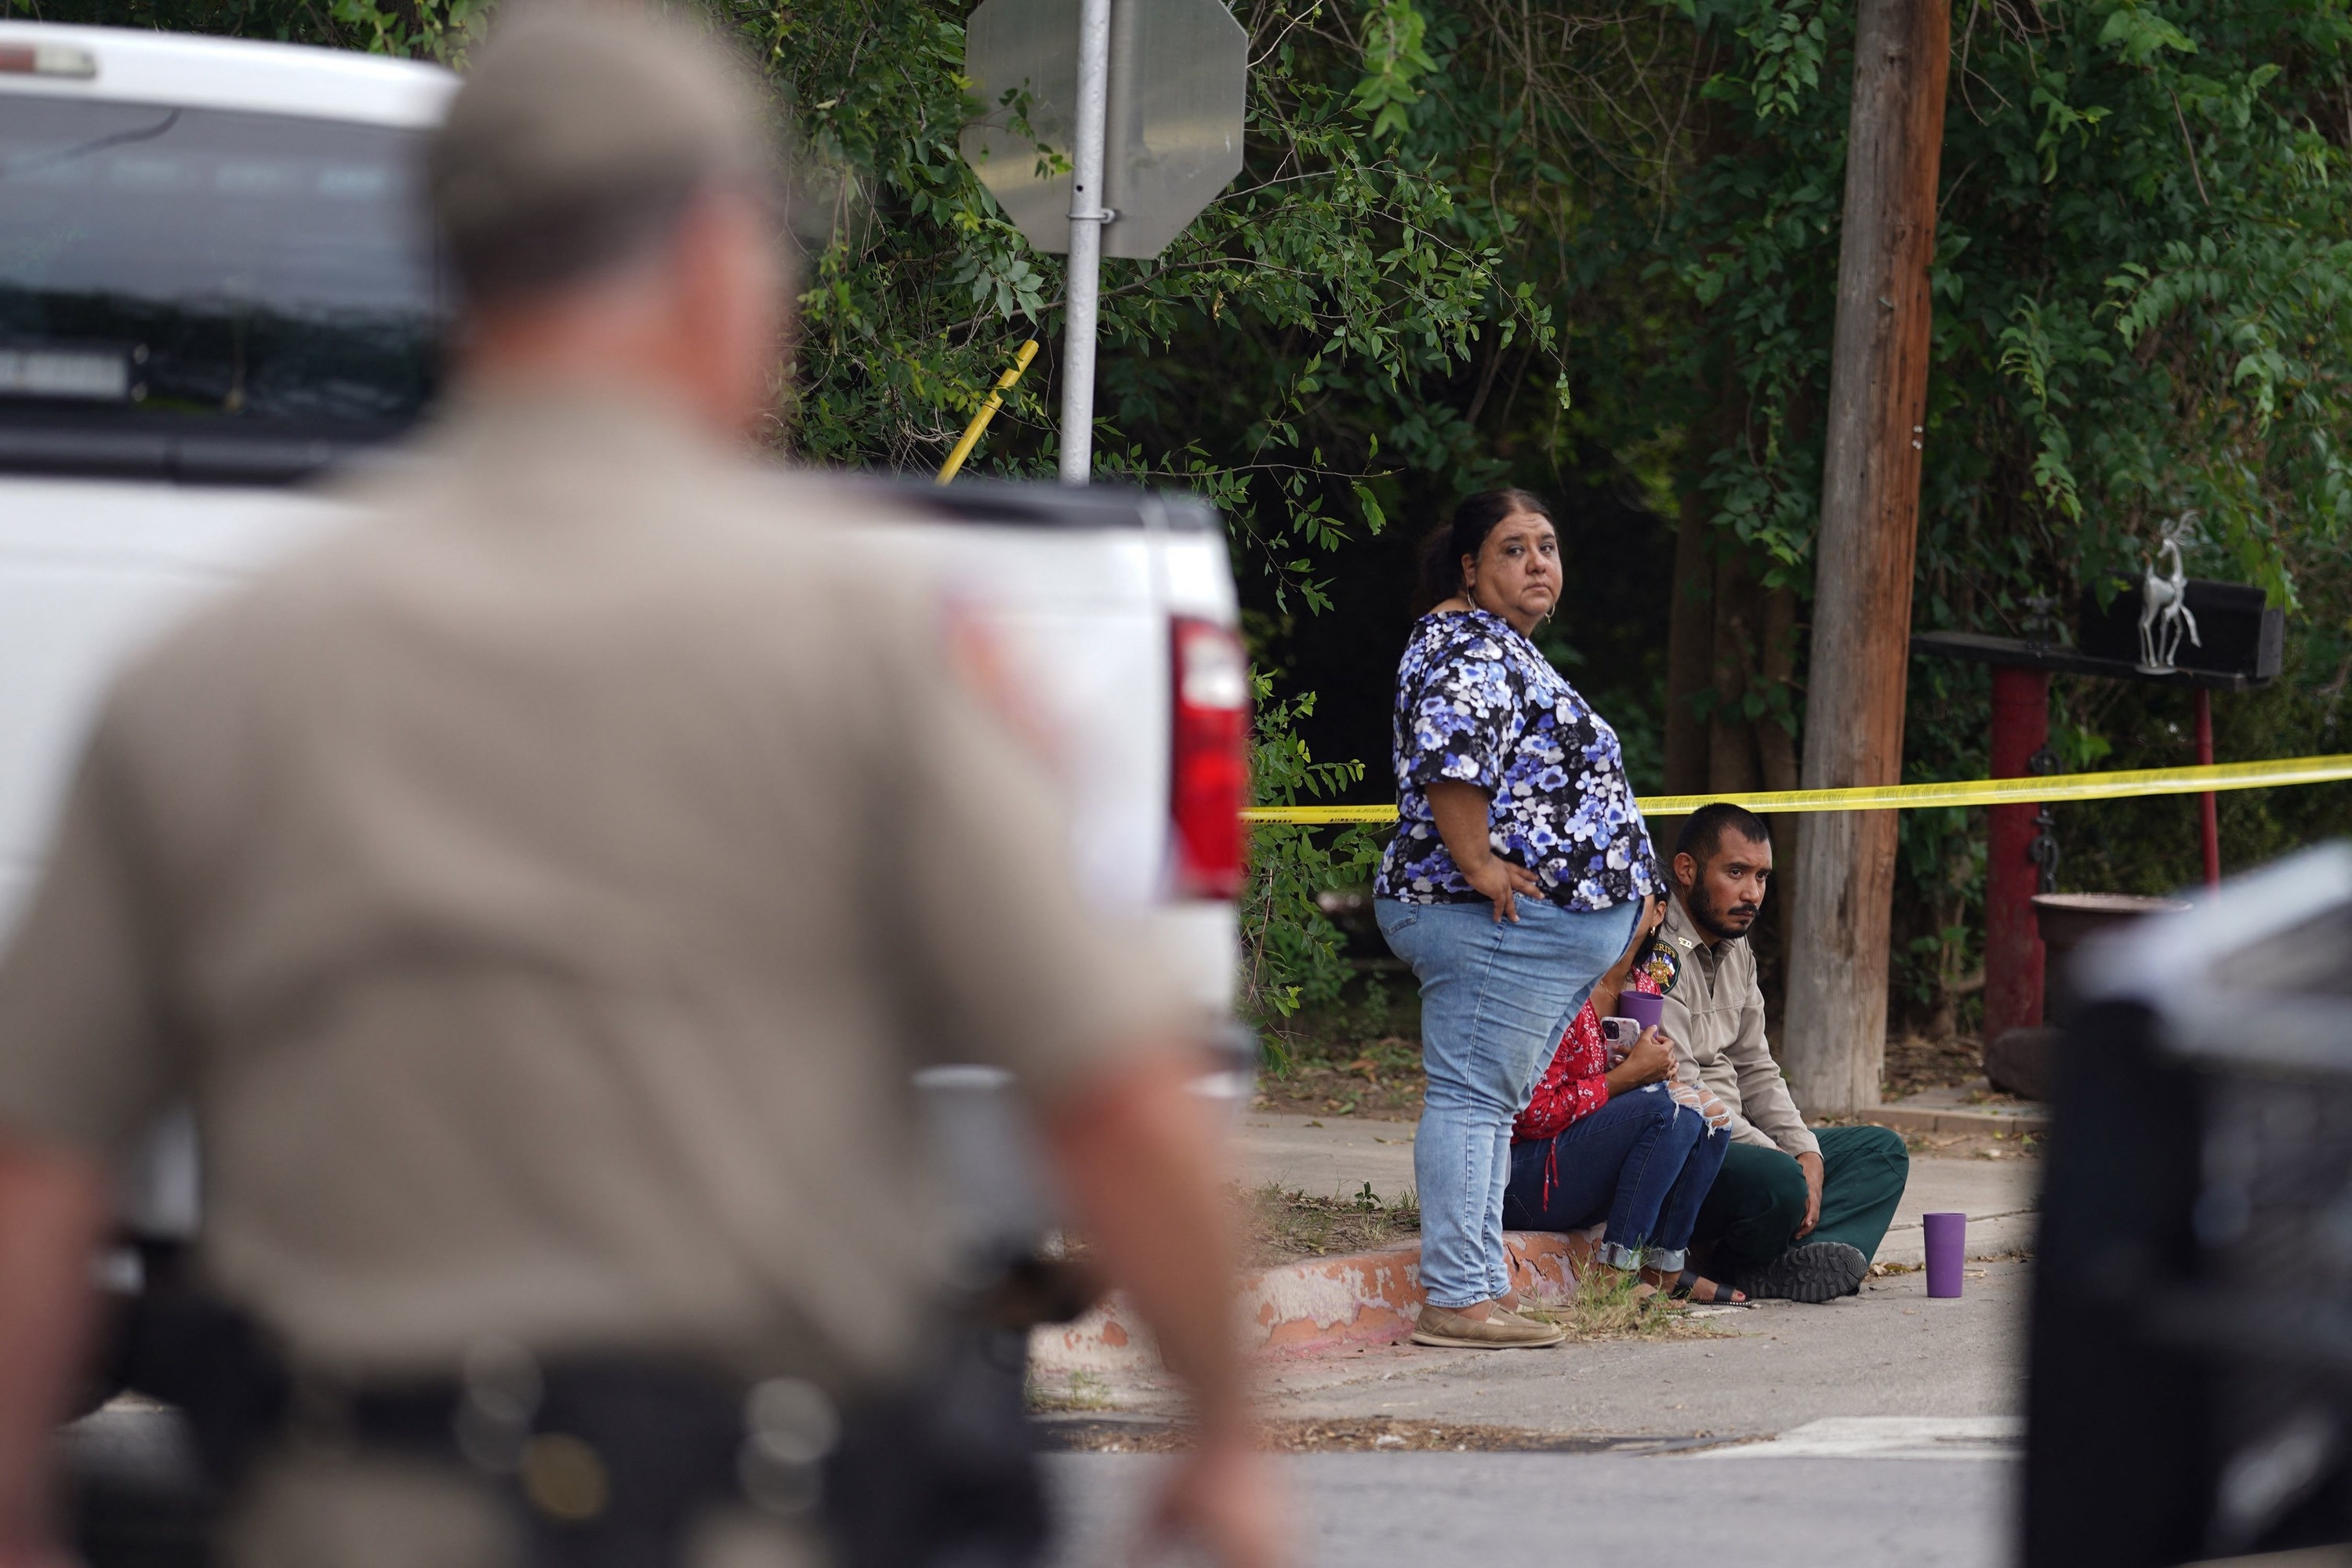 A woman in the background, standing by two people sitting on a sidewalk near some strung-up caution tape, looks toward a police officer in the foreground